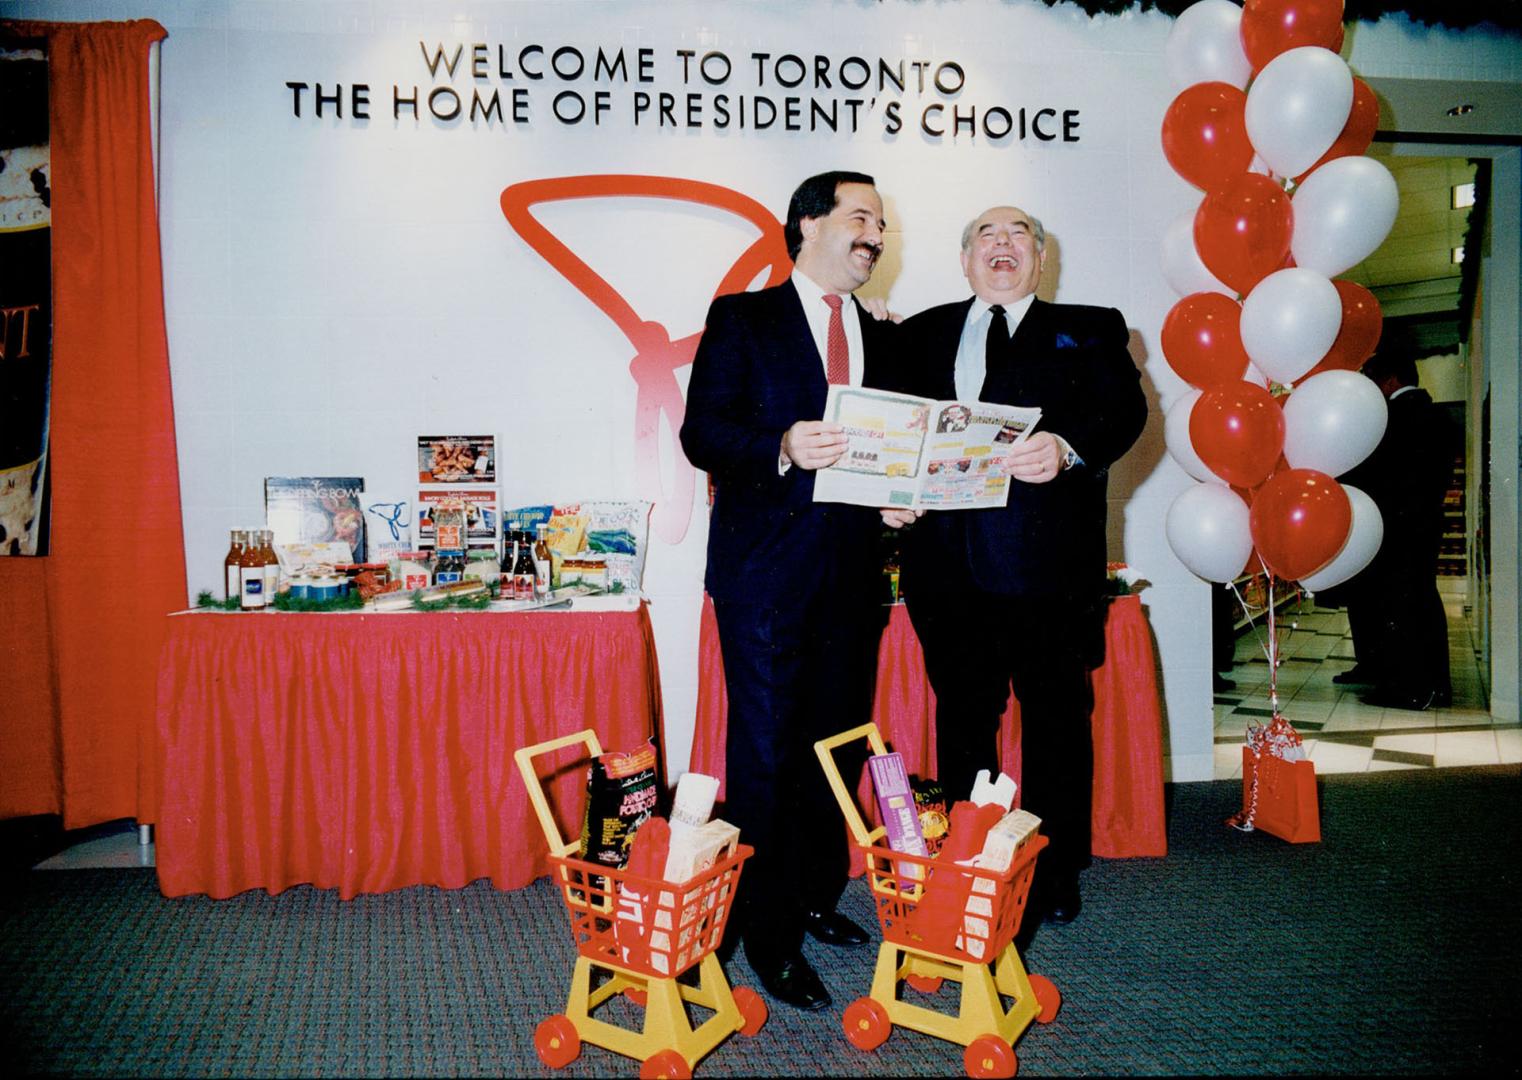 Thomas Bitove (left), and Loblaws' Brian Davidson invite airline passengers to land in new market at Pearson International.